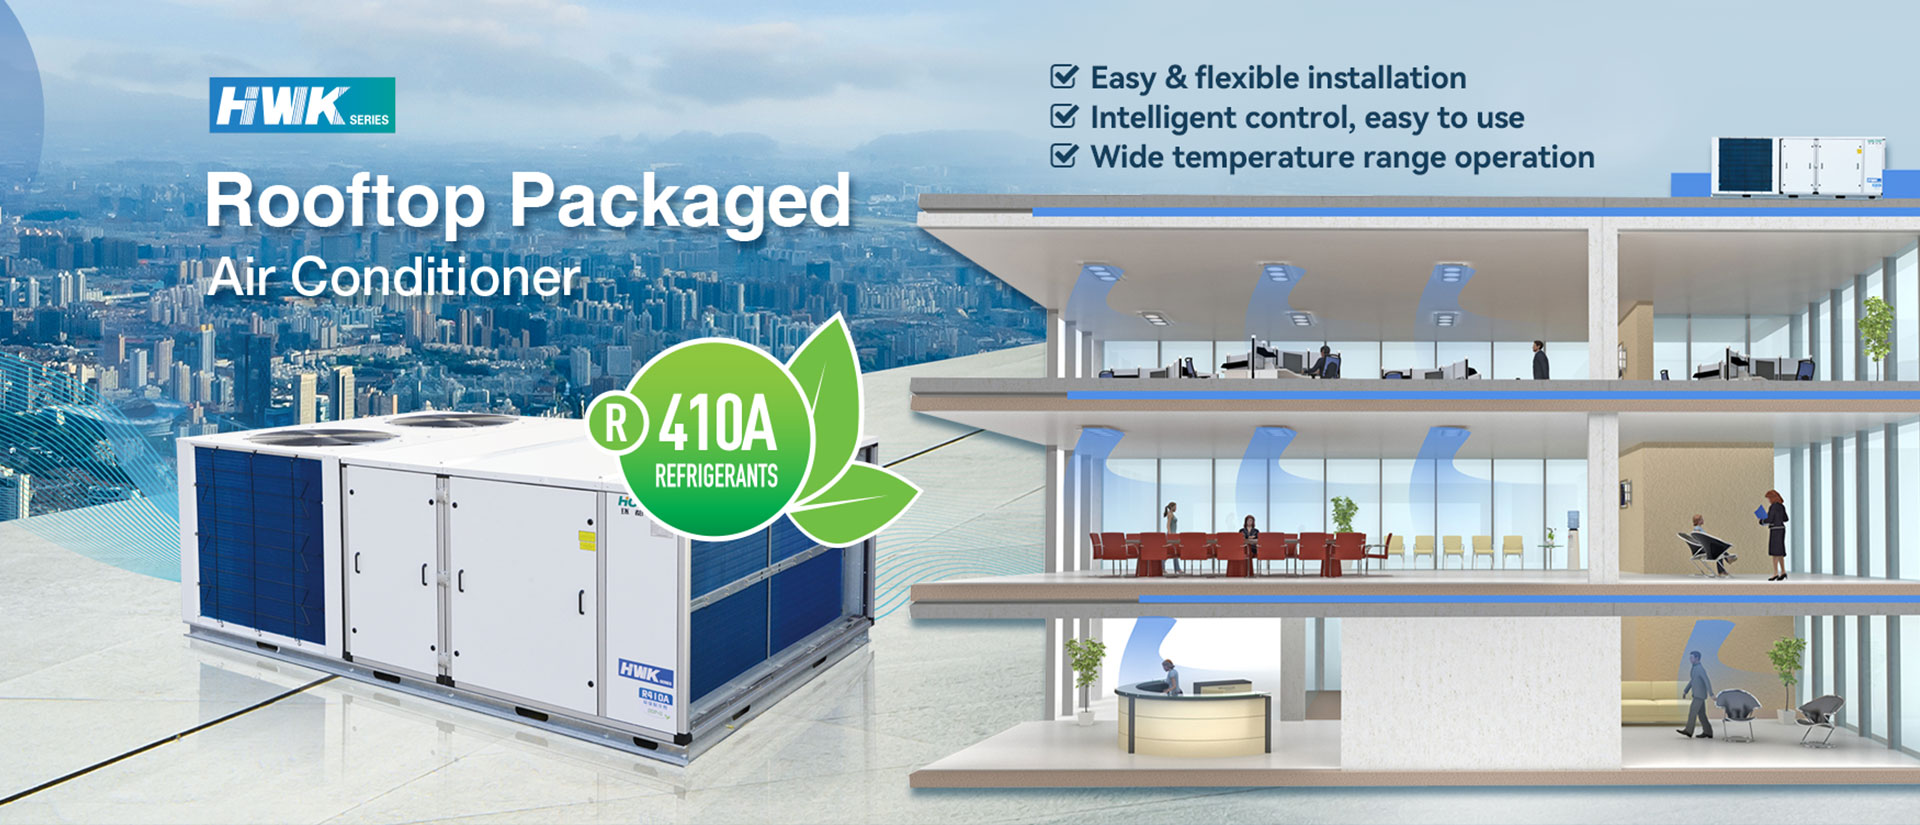 ROOFTOP PACKAGED AIR CONDITIONER